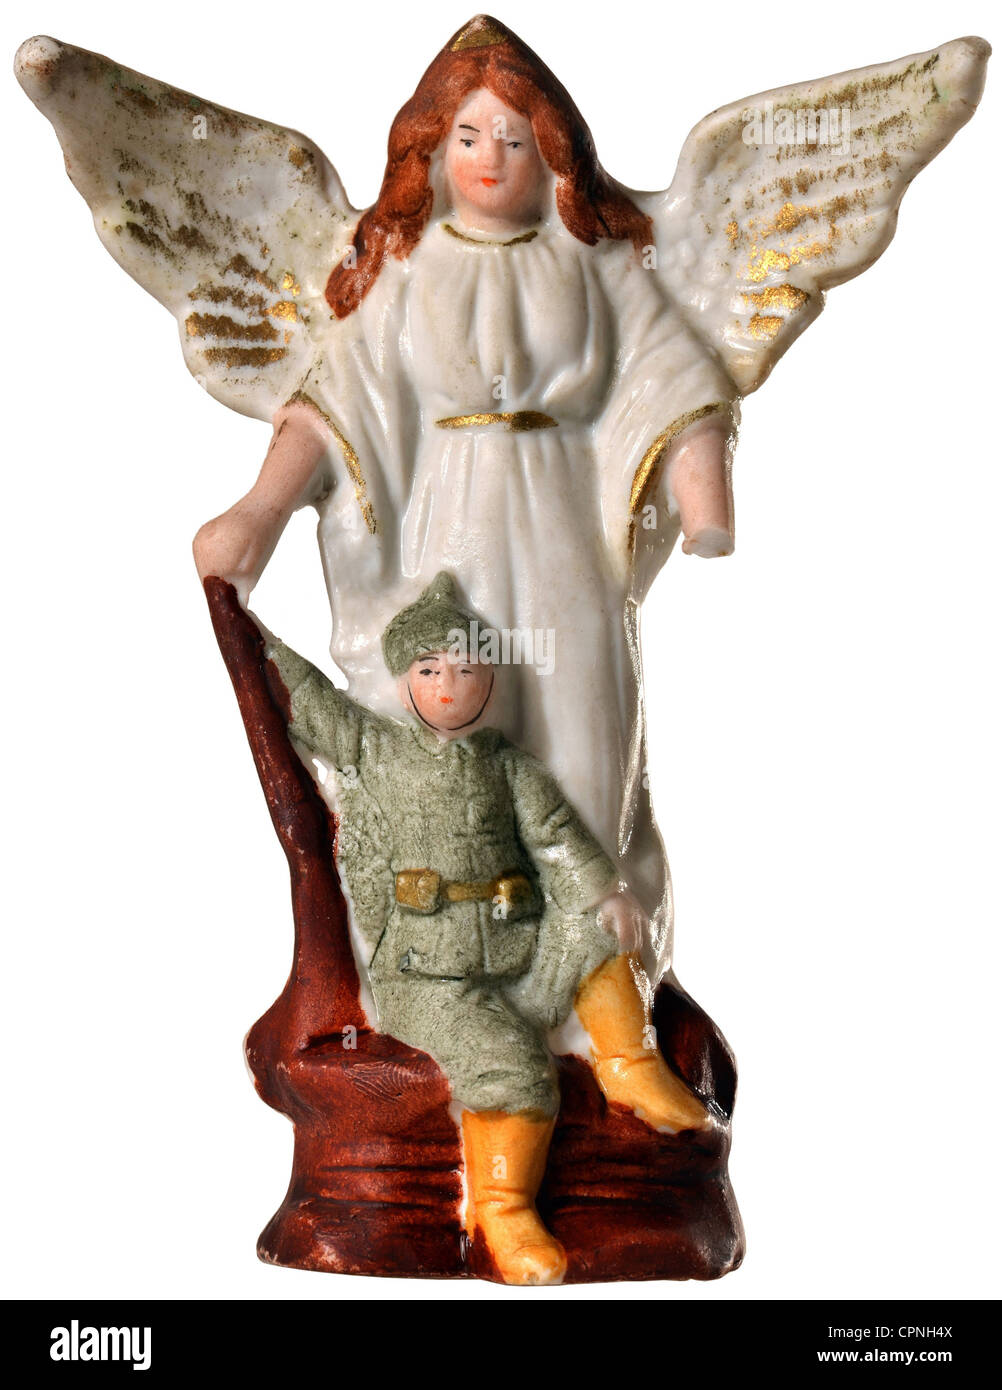 First World War / WWI, guardian angel protecting German soldier, small ceramic figure, Germany, 1914, Additional-Rights-Clearences-Not Available Stock Photo